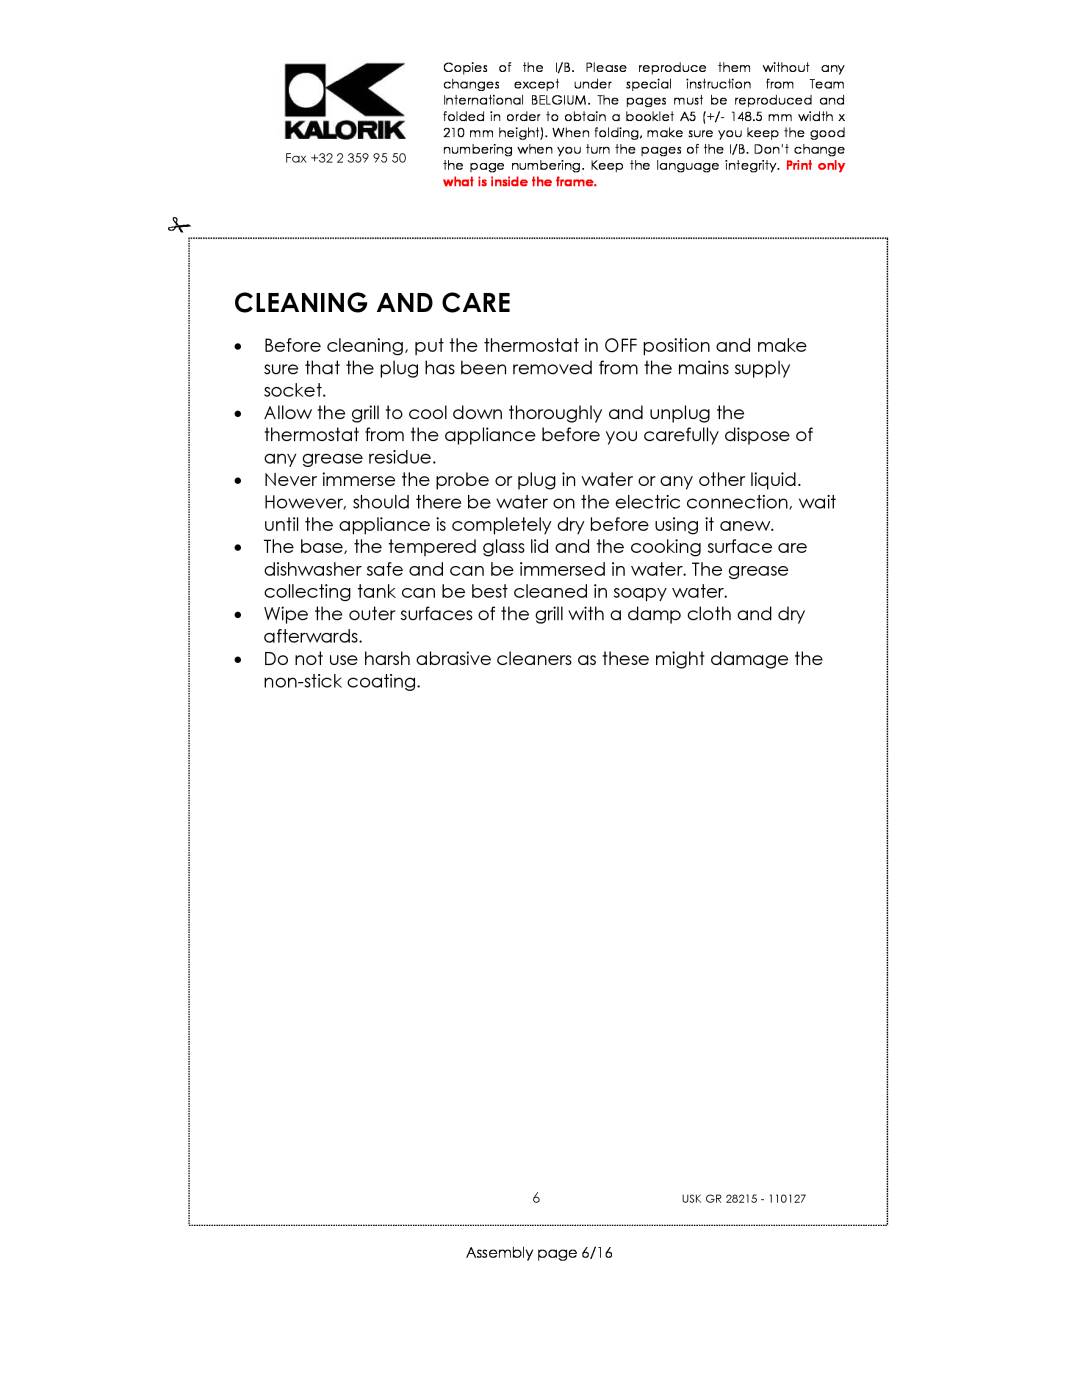 Kalorik USK GR 28215 manual Cleaning And Care, Assembly page 6/16 